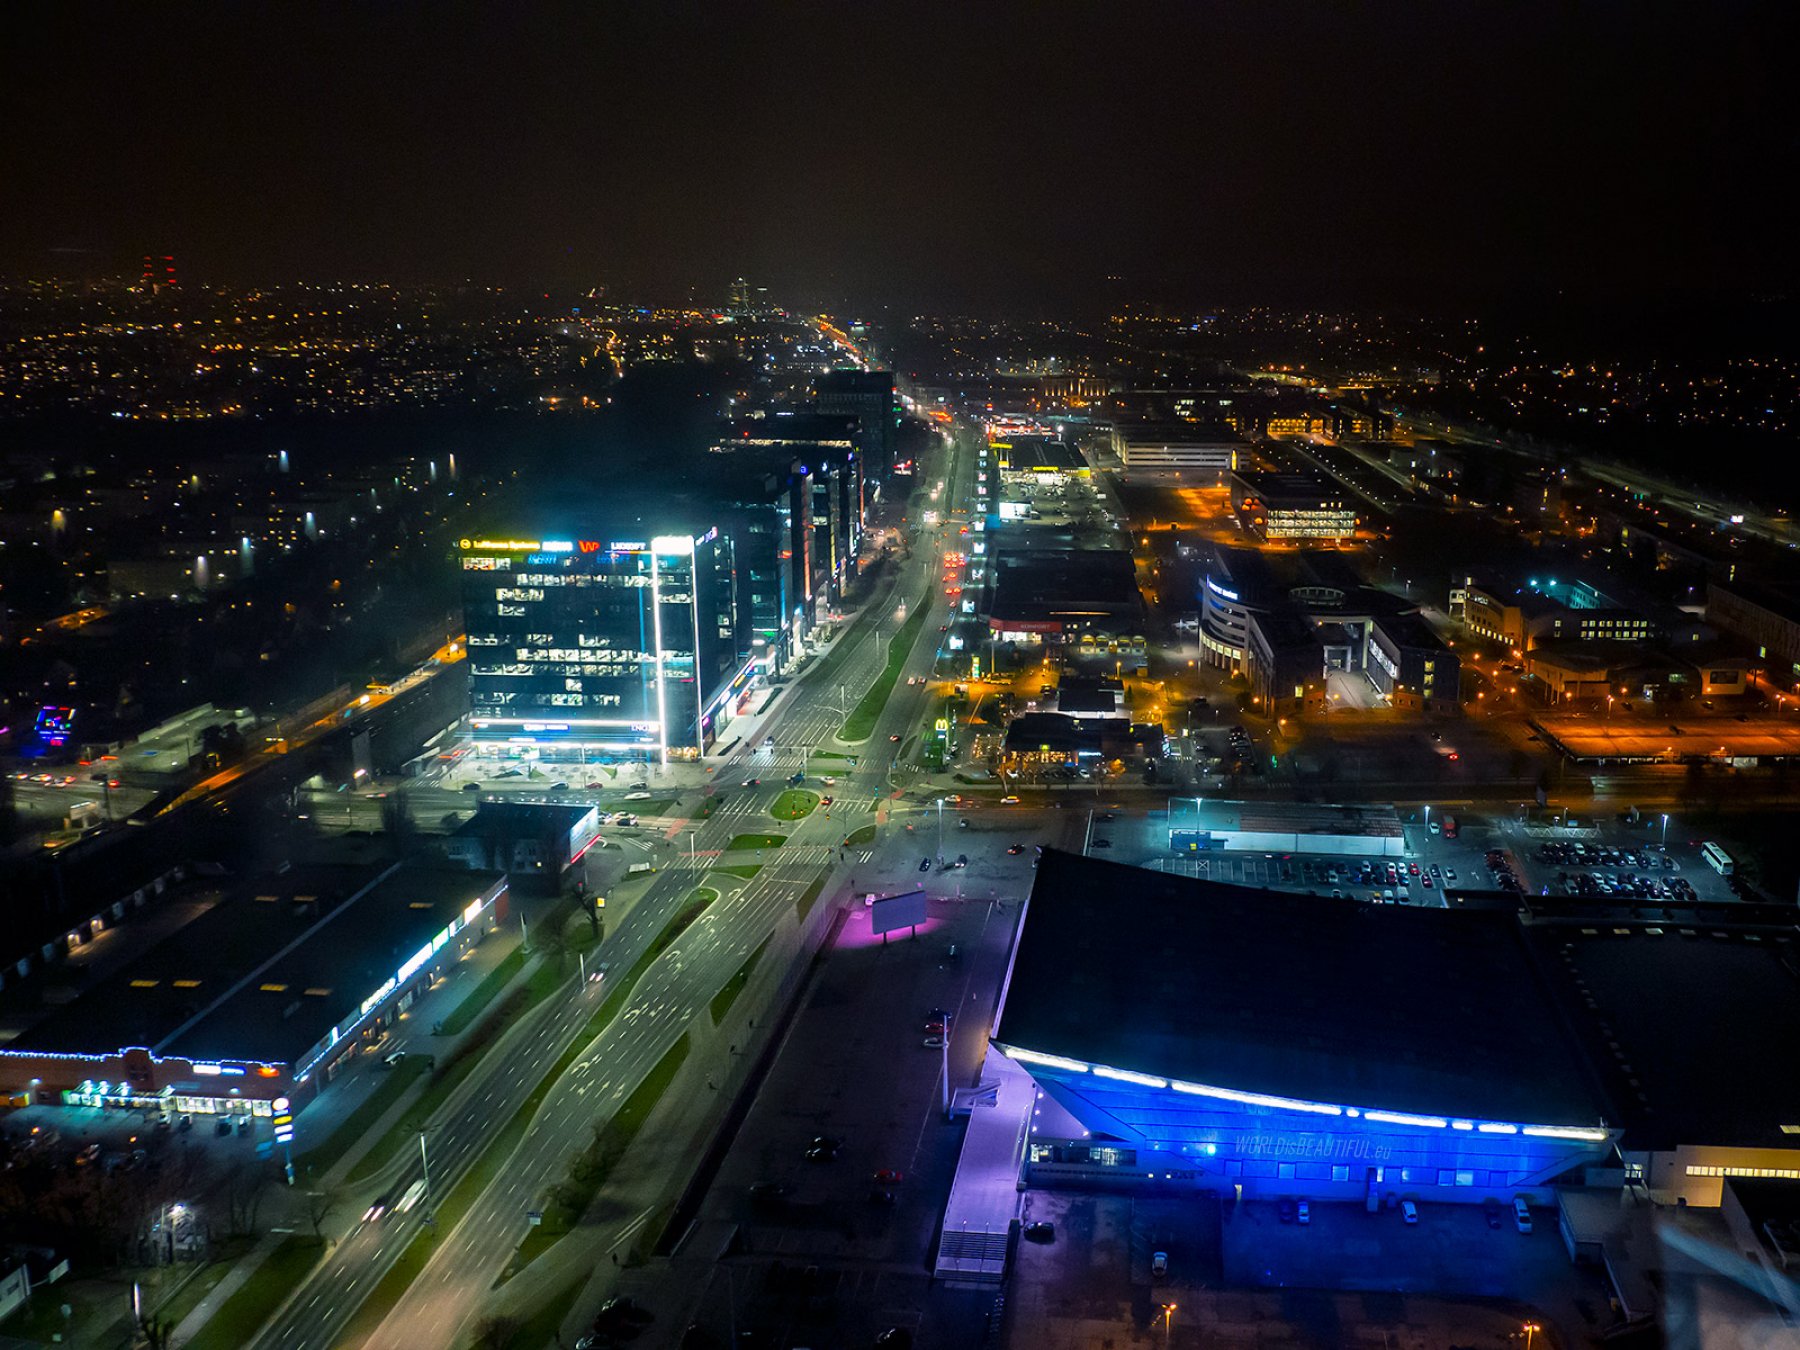 View of Gdansk from the Olivia Business Center